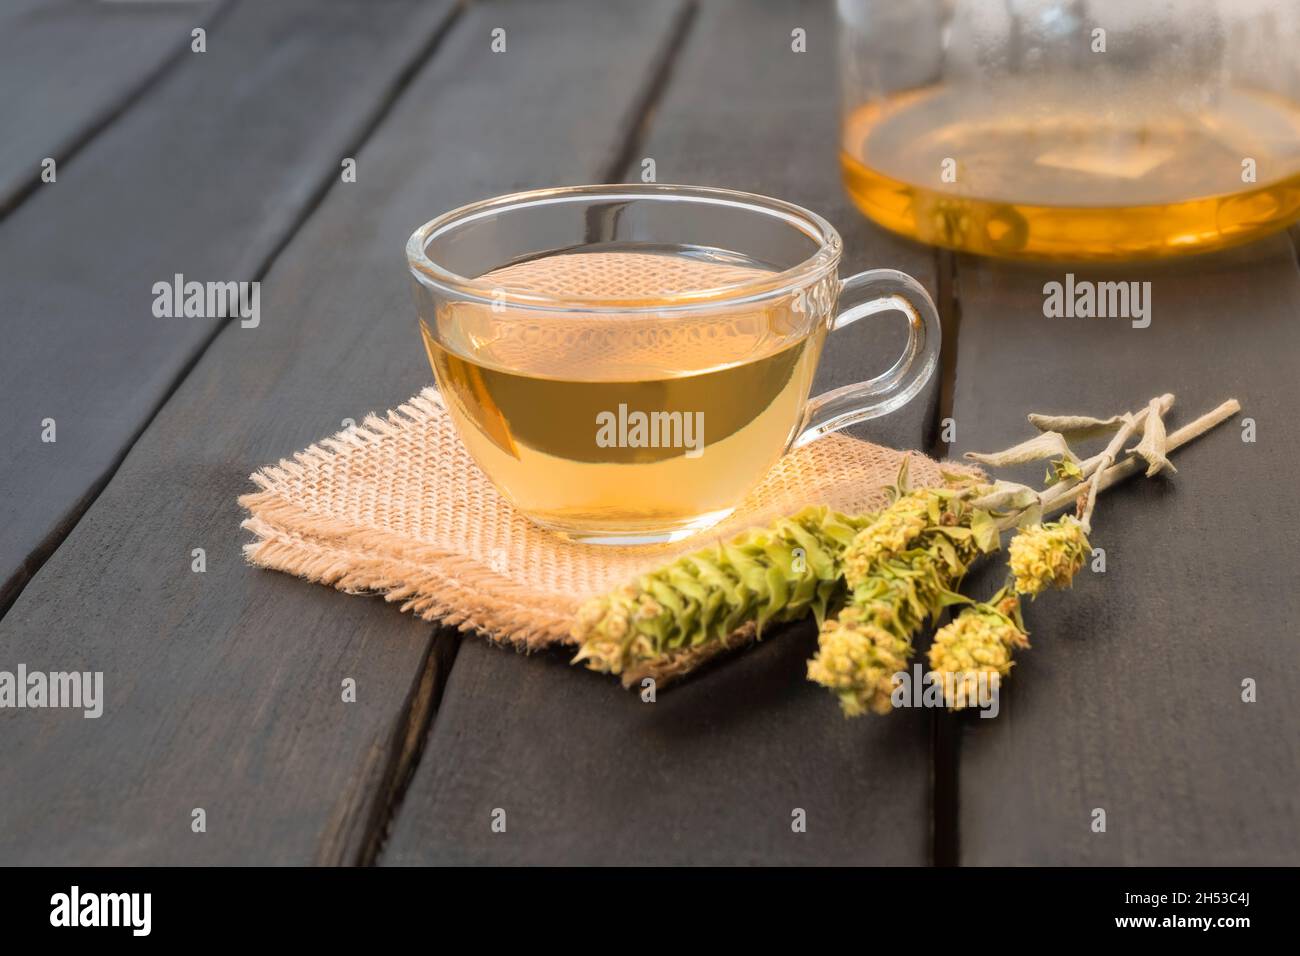 Bulgarian Mountain Tea Mursalski Tea in a glass cup on dark wooden table with dried leaves and flowers Stock Photo